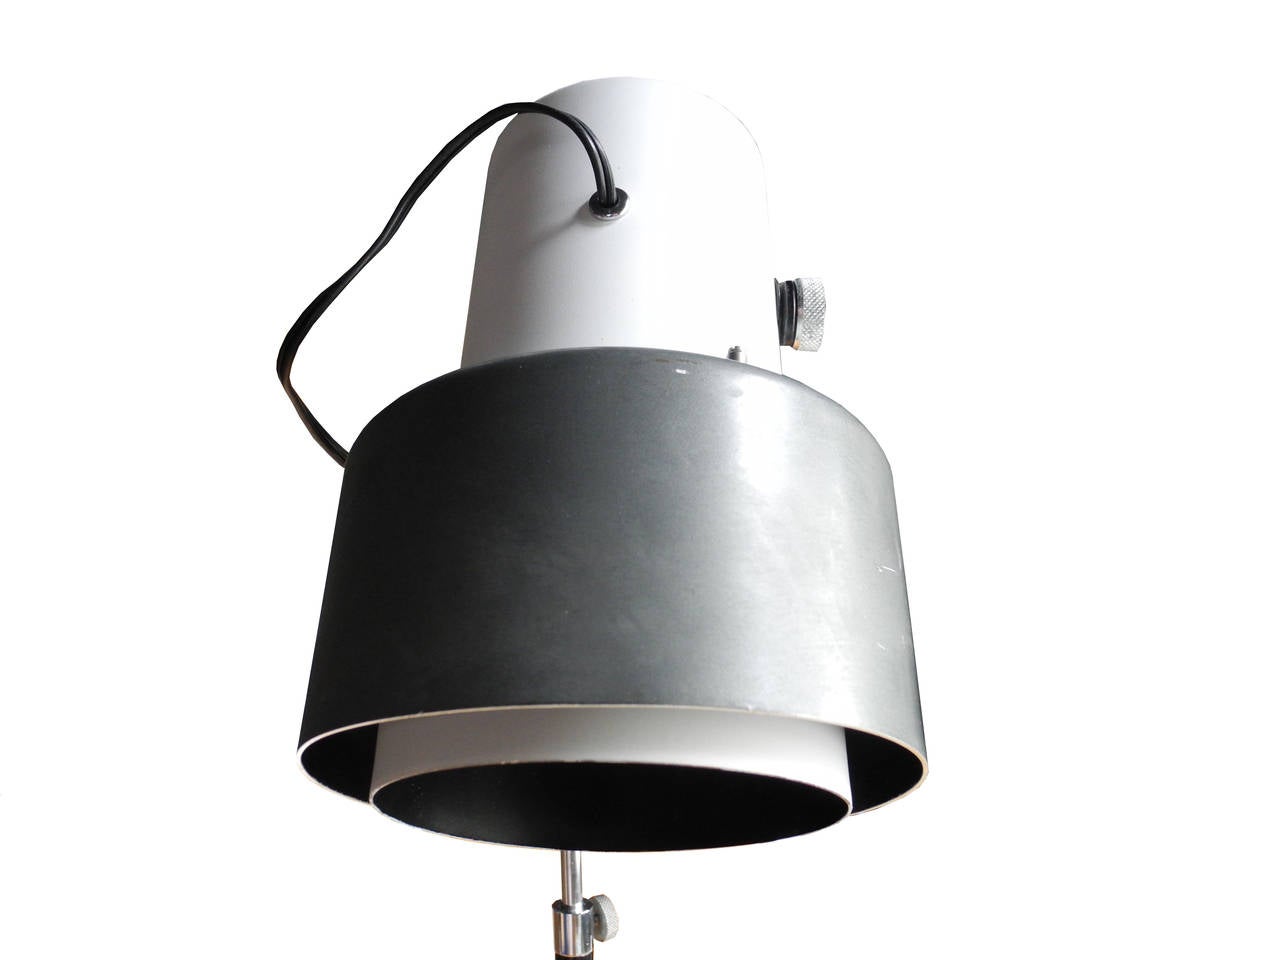 20th Century Modern Italian Marble and Spun Metal Floor Lamp in the Style of Louis Poulsen For Sale